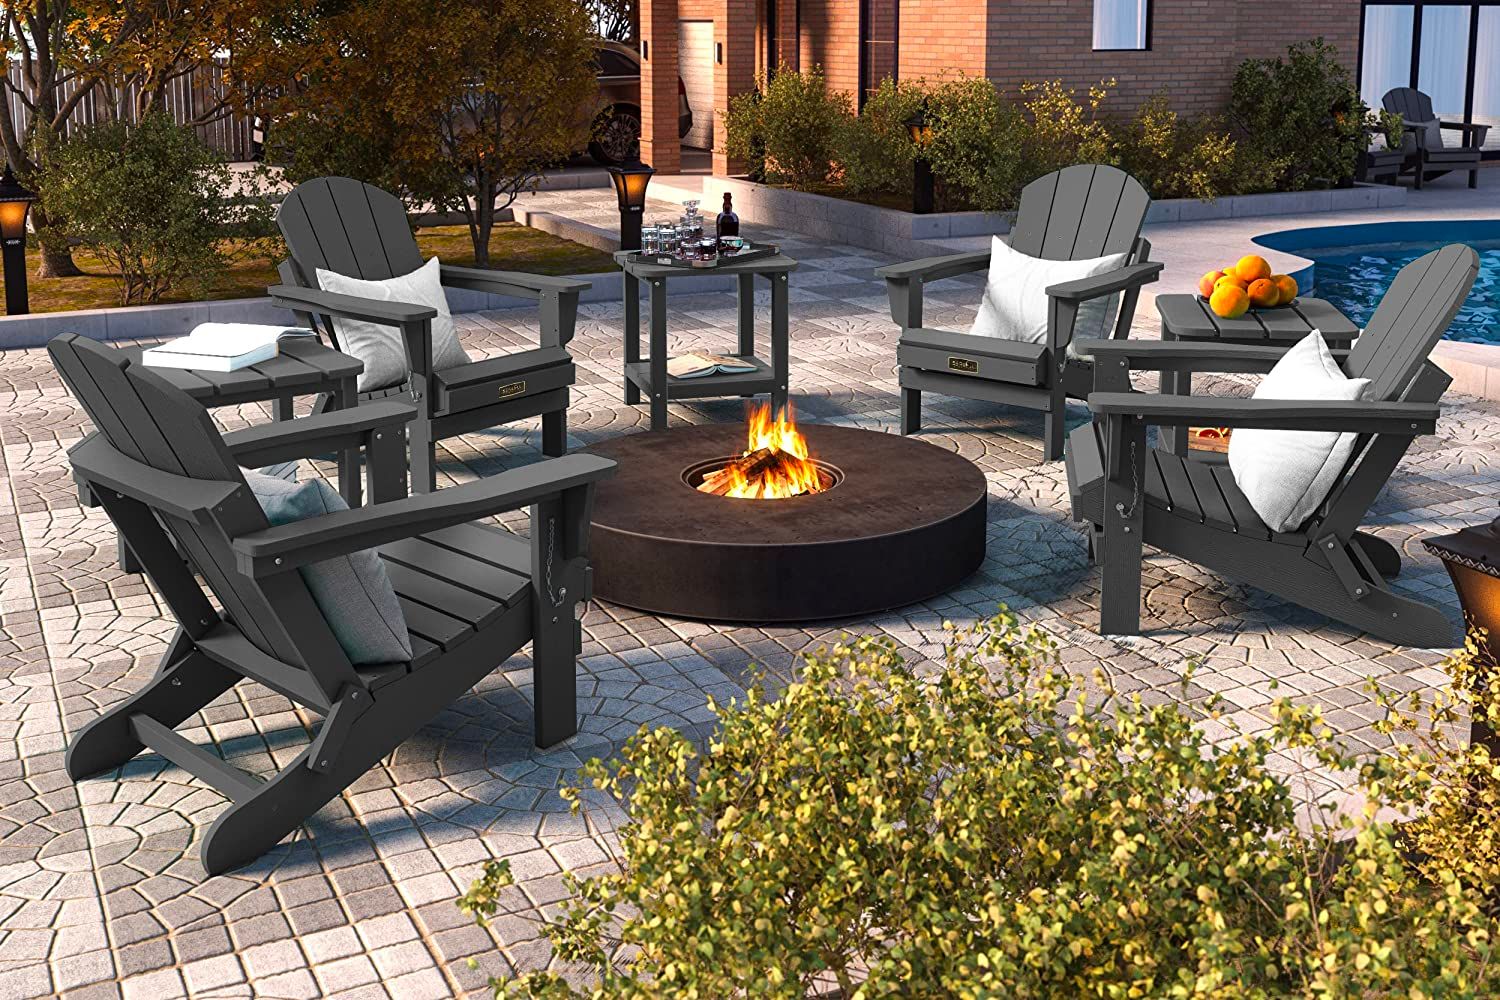 Adirondack chairs with a fire pit on a patio - Benefits of Outdoor Fire Pits.